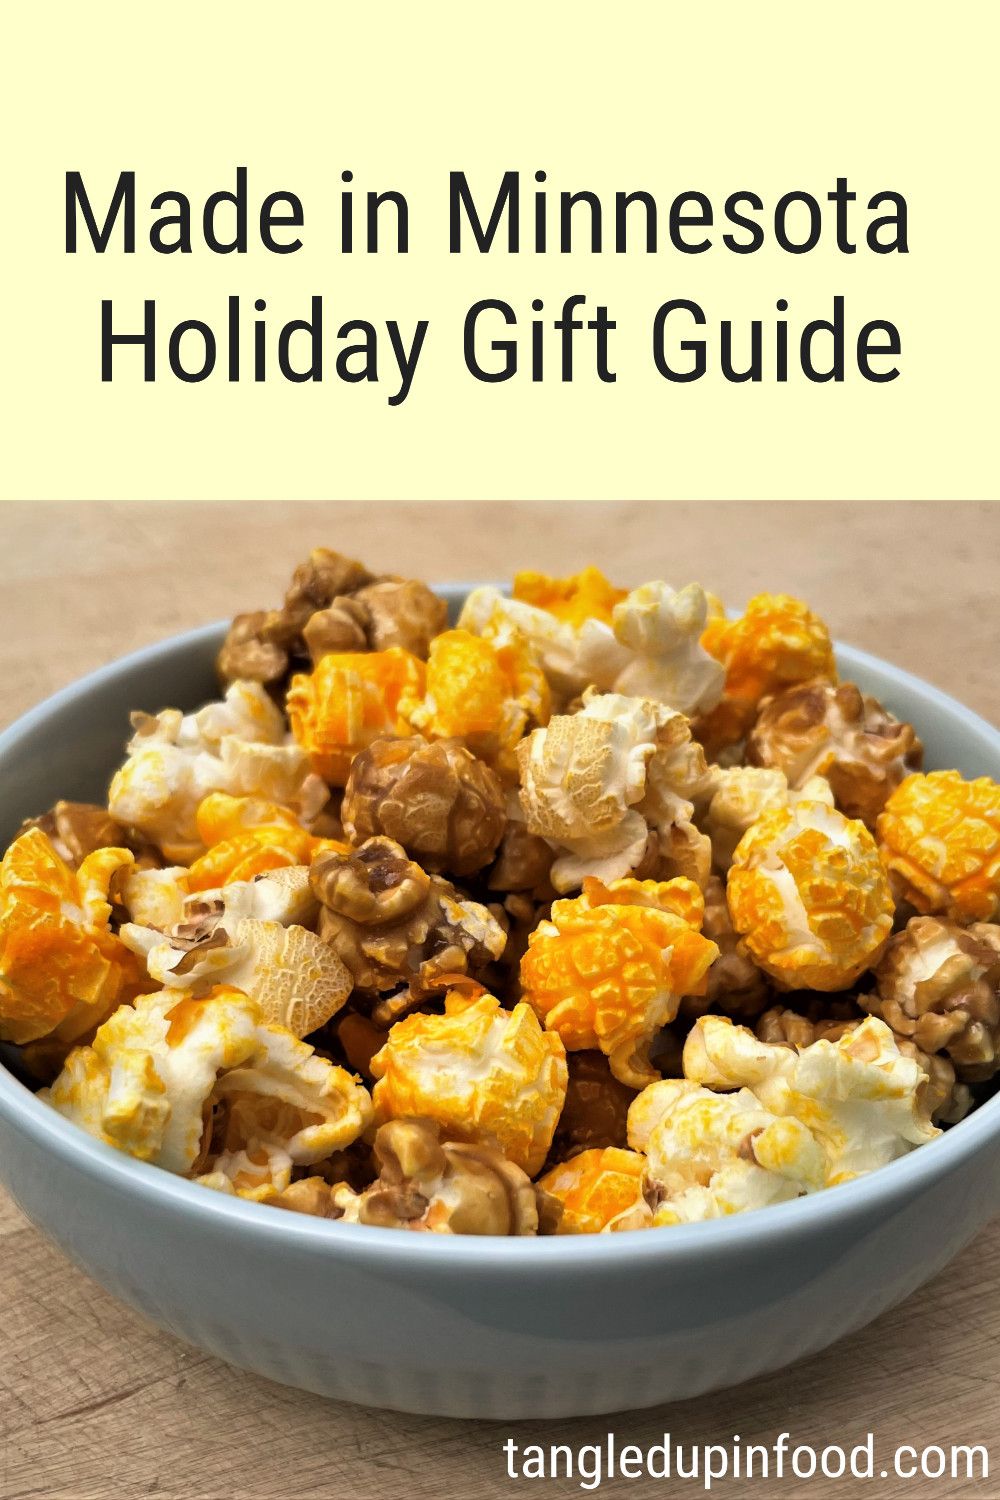 Bowl of popcorn with text reading "Made in Minnesota Holiday Gift Guide"